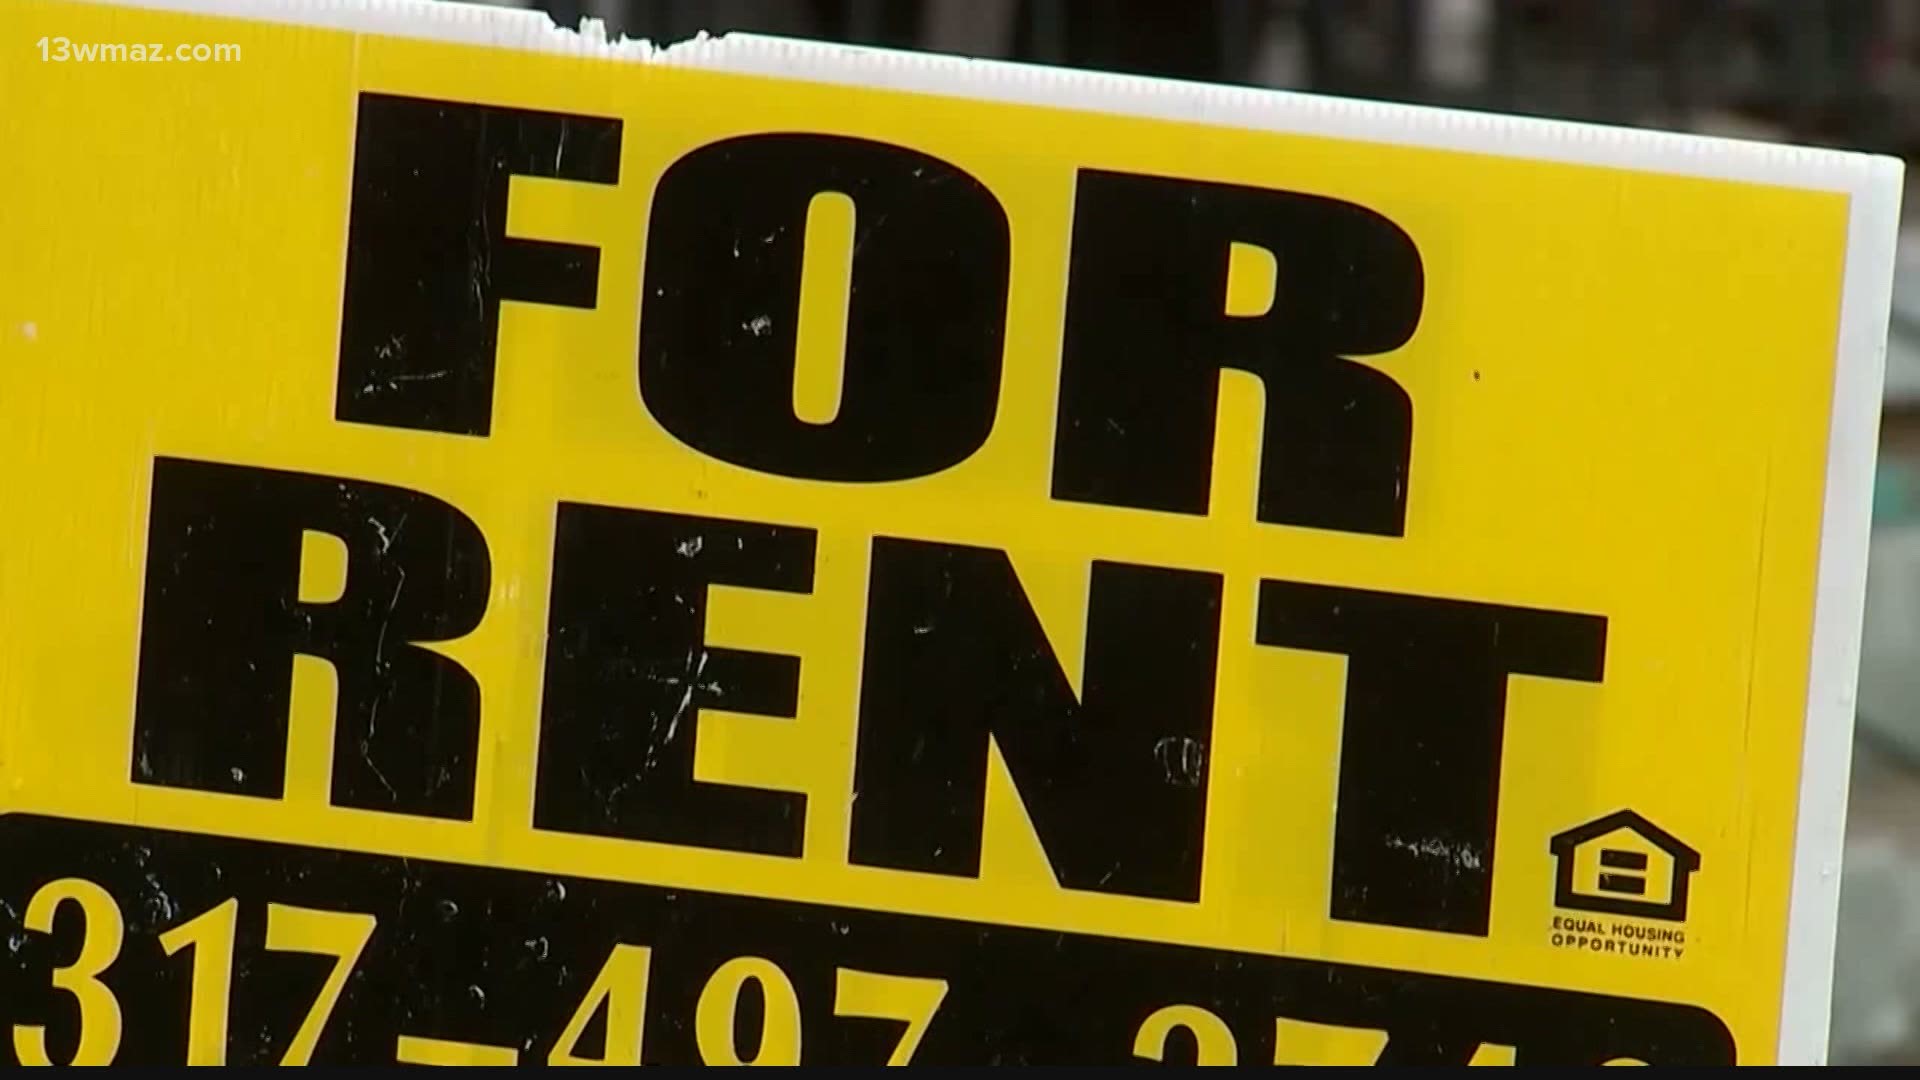 The federal government put many evictions on hold this spring due to the COVID-19 crisis, but now, landlords can evict tenants.